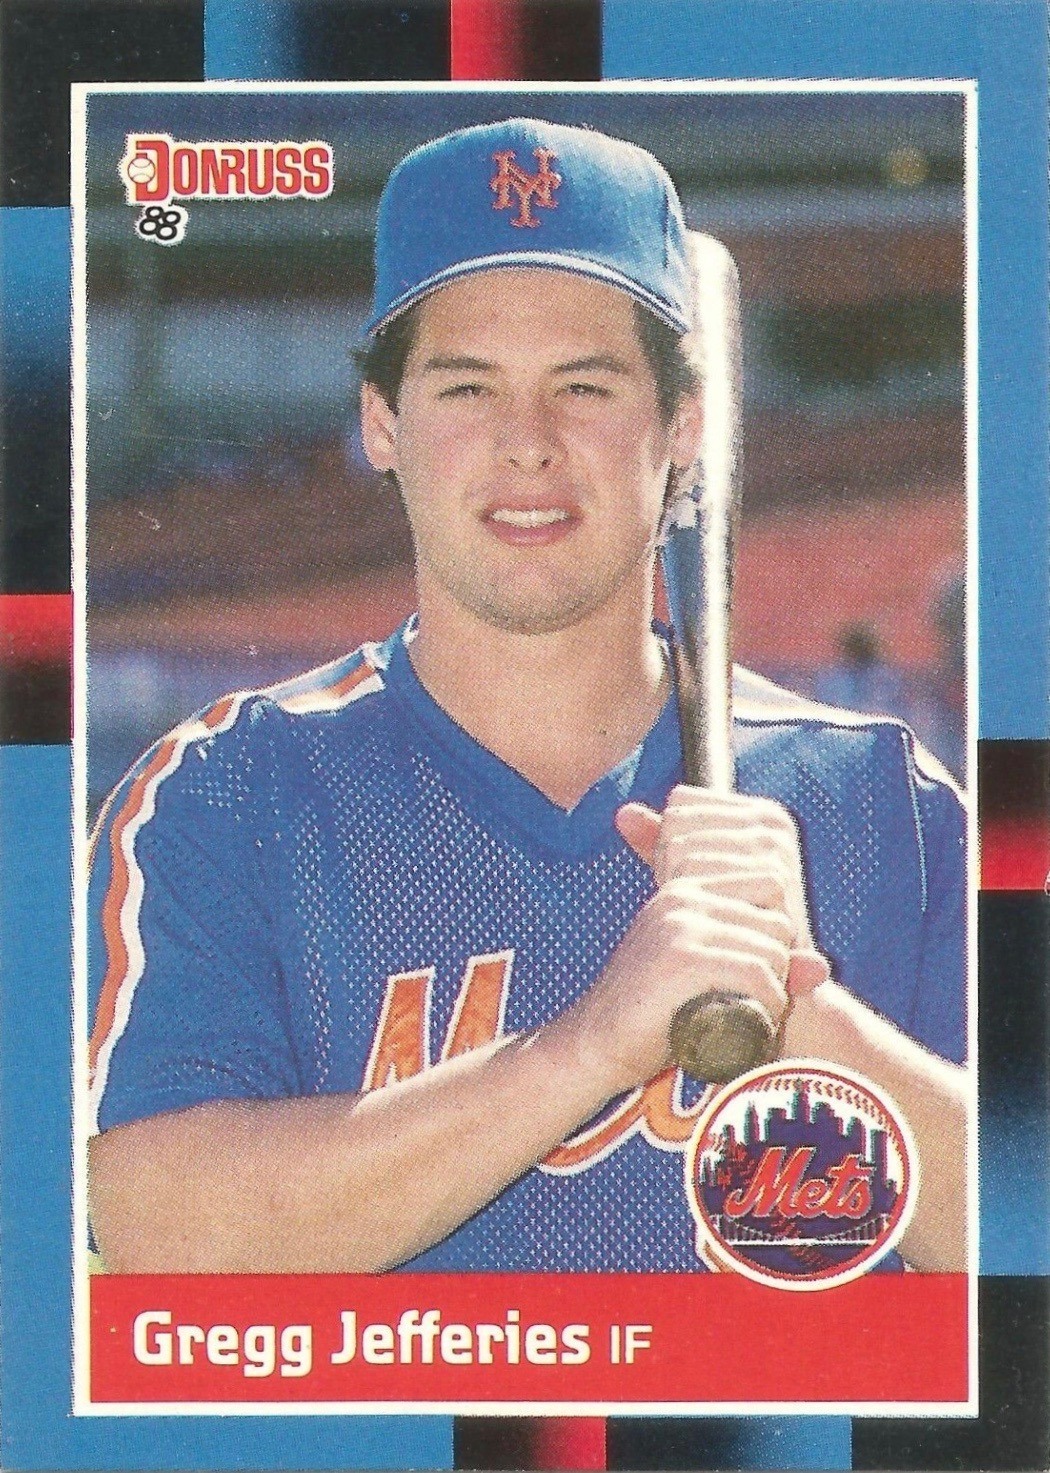 10 Most Valuable 1988 Donruss Baseball Cards | Old Sports Cards